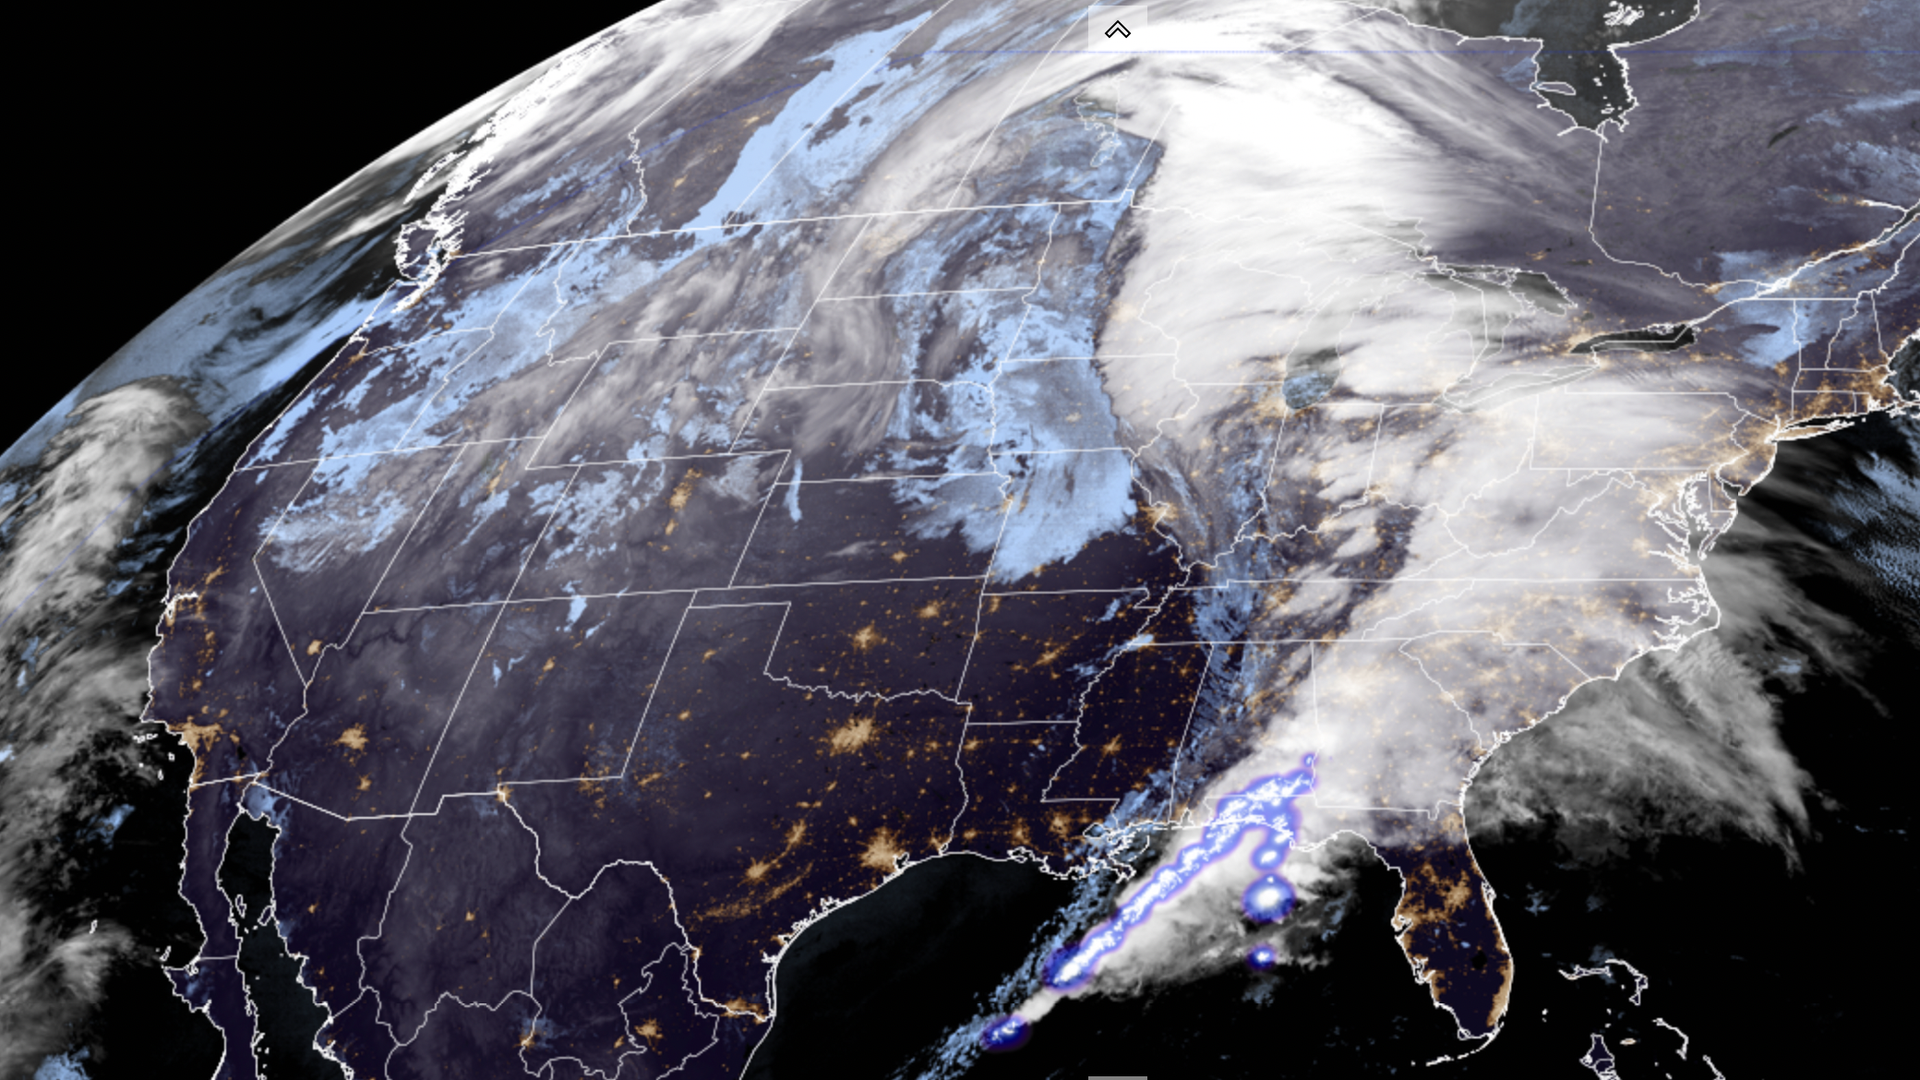 A satellite image showing the sprawling storm that's sweeping the US, with thunderstorms and lightning in the South and blizzard conditions across the Plains, Midwest and Great Lakes.